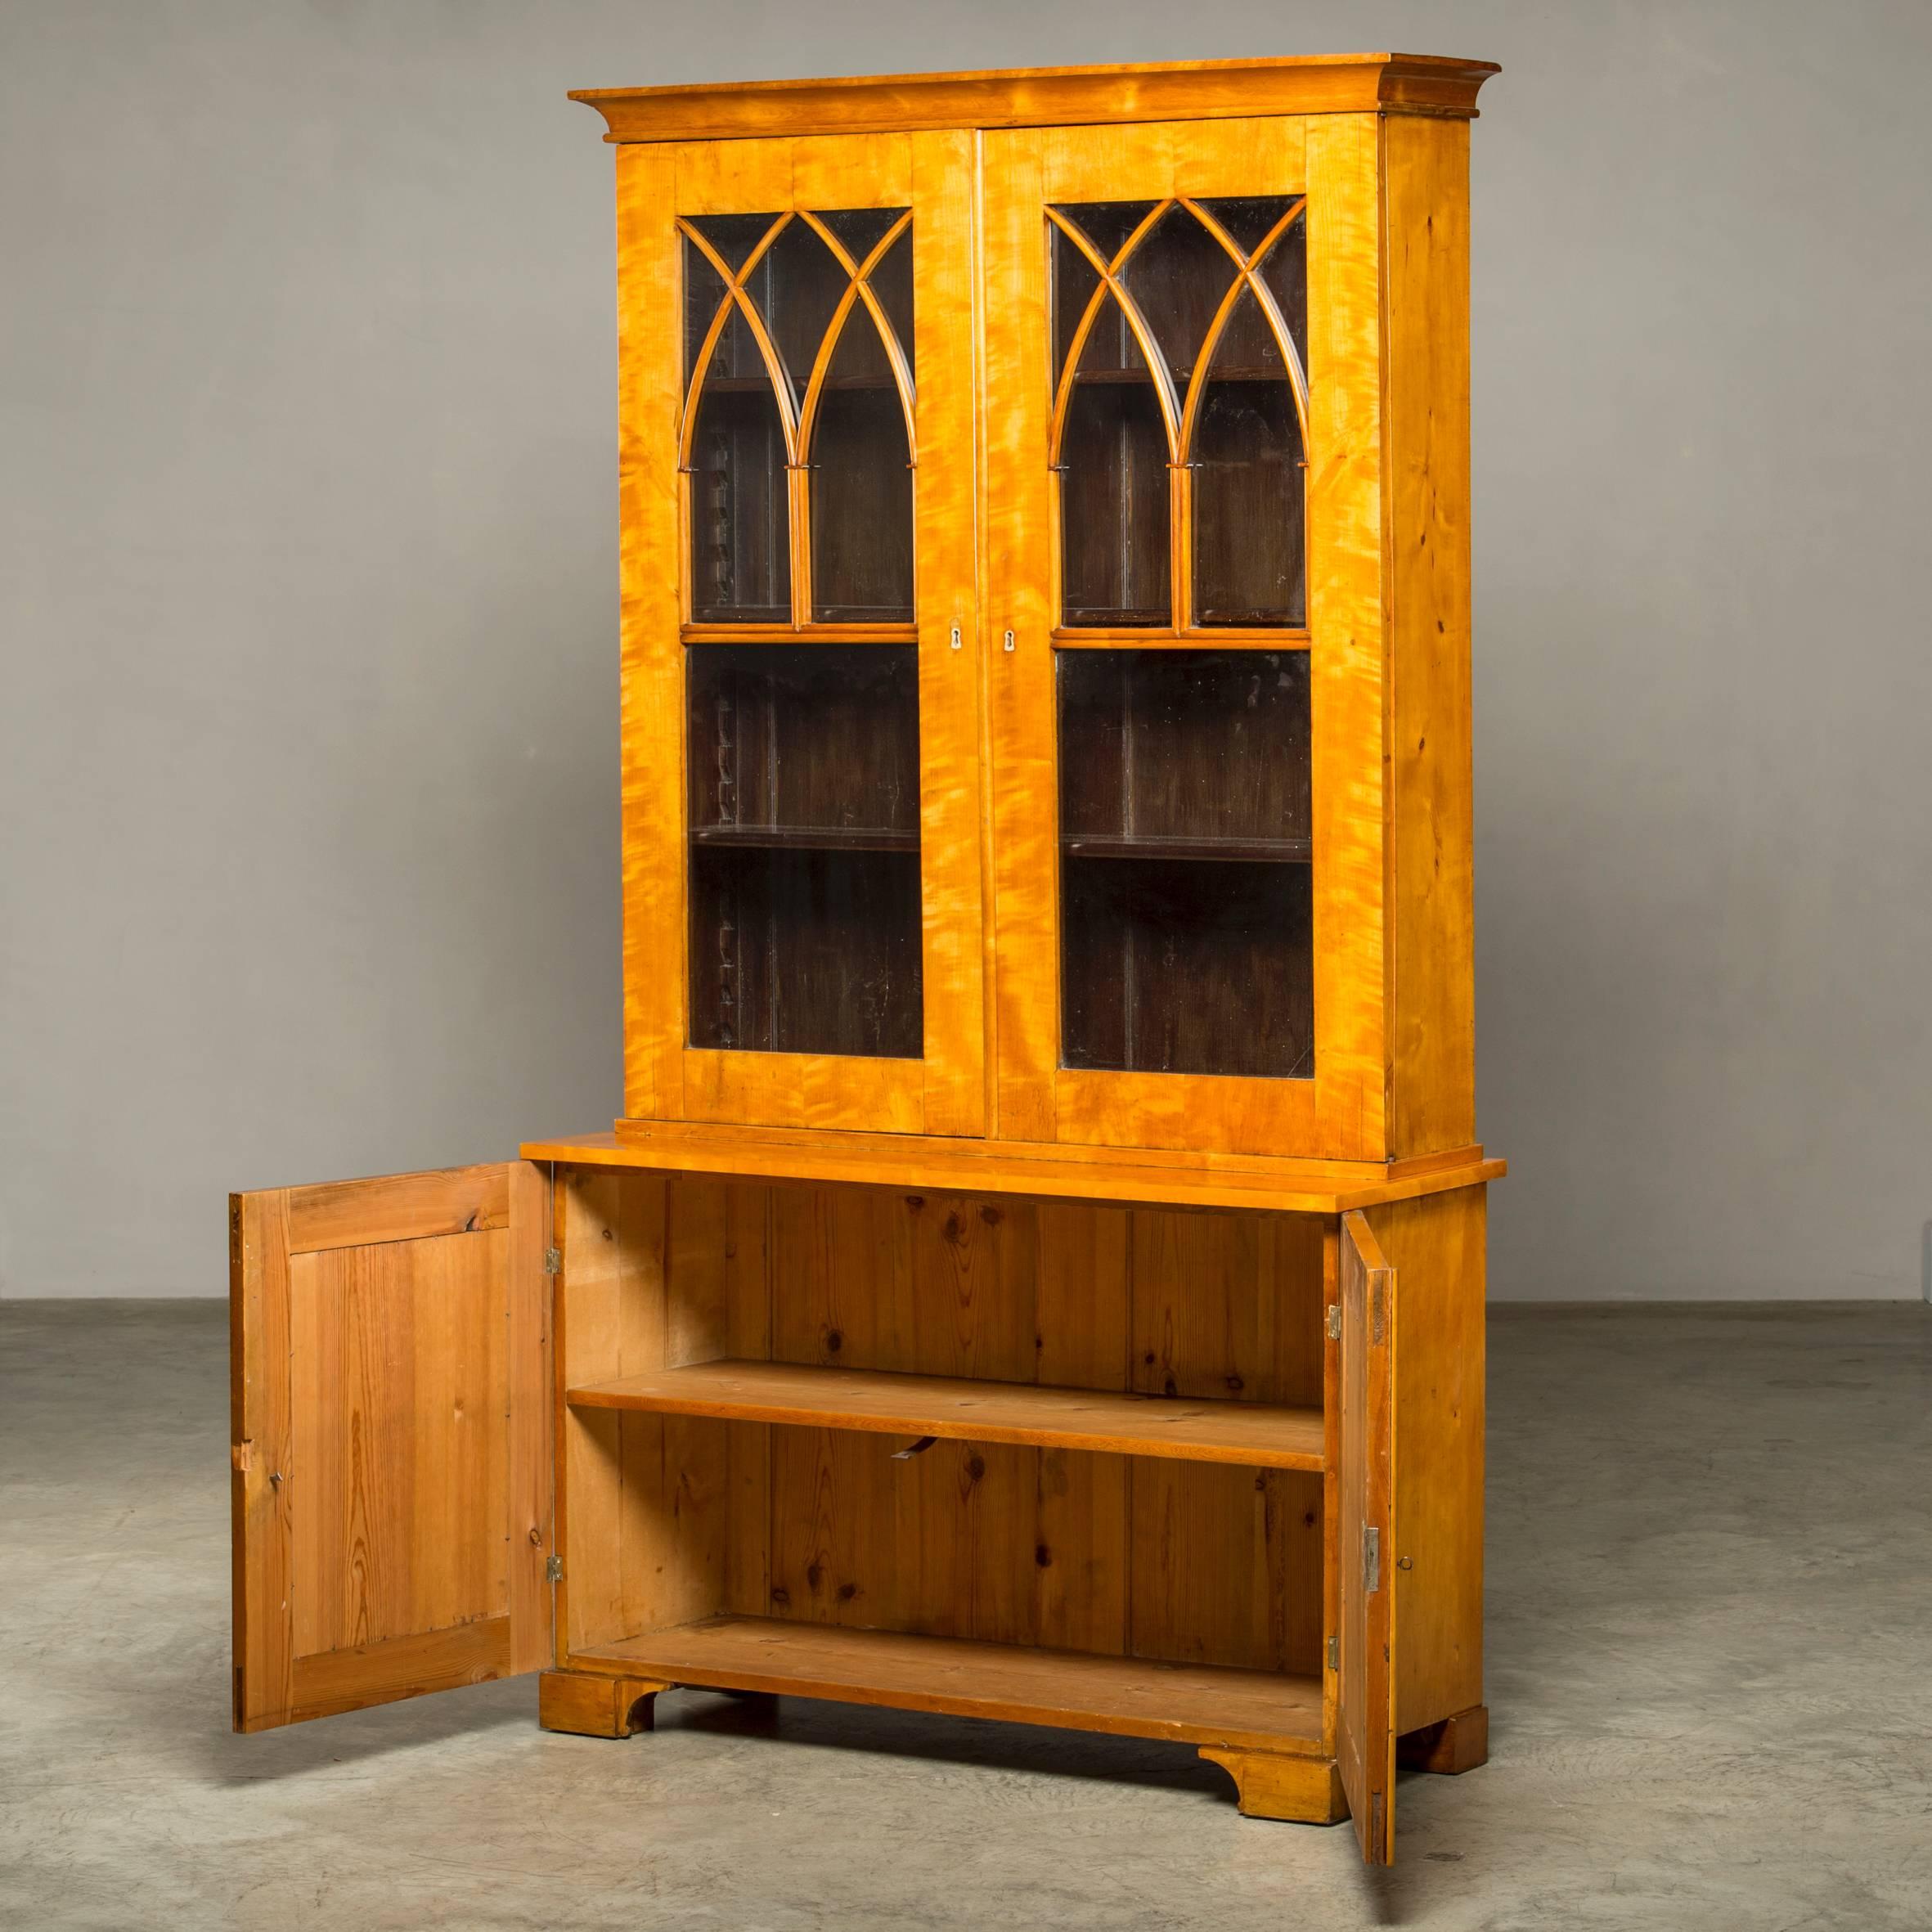 Carl Johan bookcase, Gothic inspired, made of light birch. Top with a pair of glass doors, base with a pair of doors behind which shelves, Sweden, circa 1820.